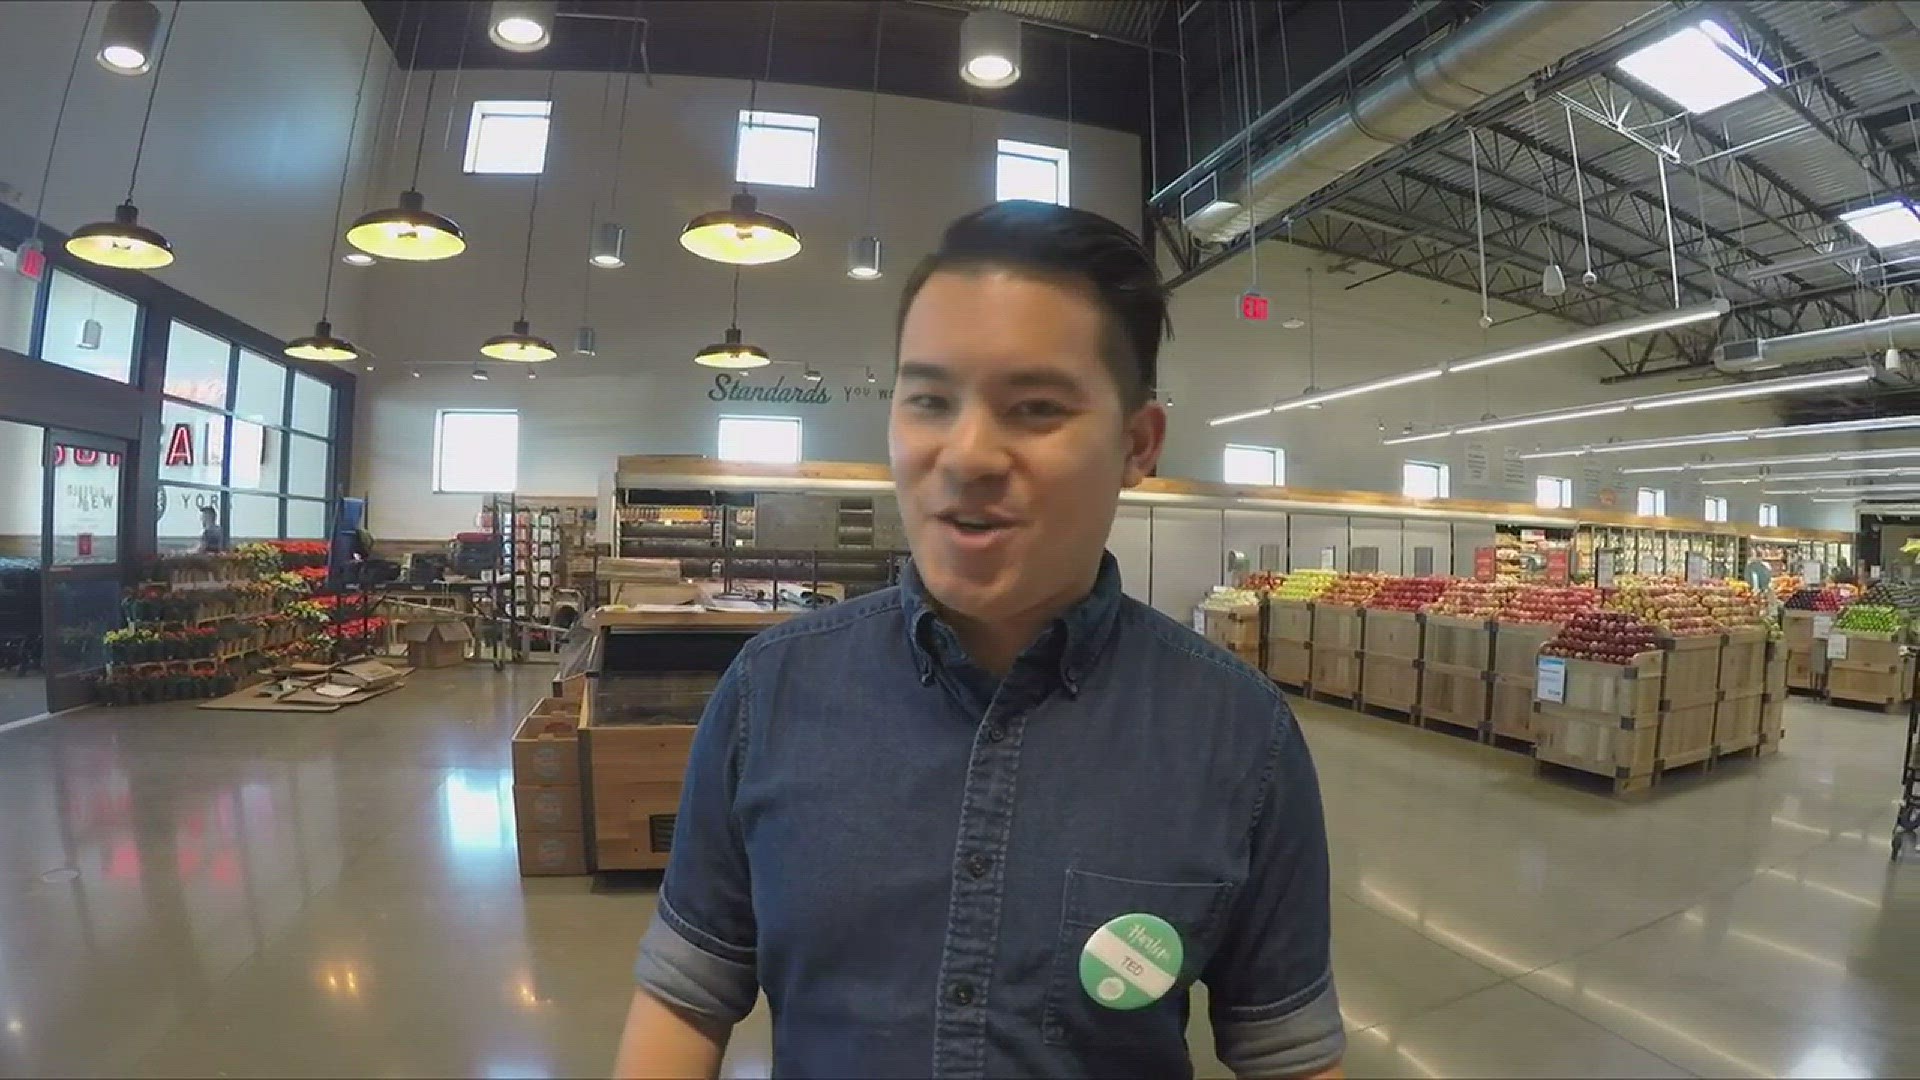 Whole foods takes us on a walking tour of their new store in Amherst